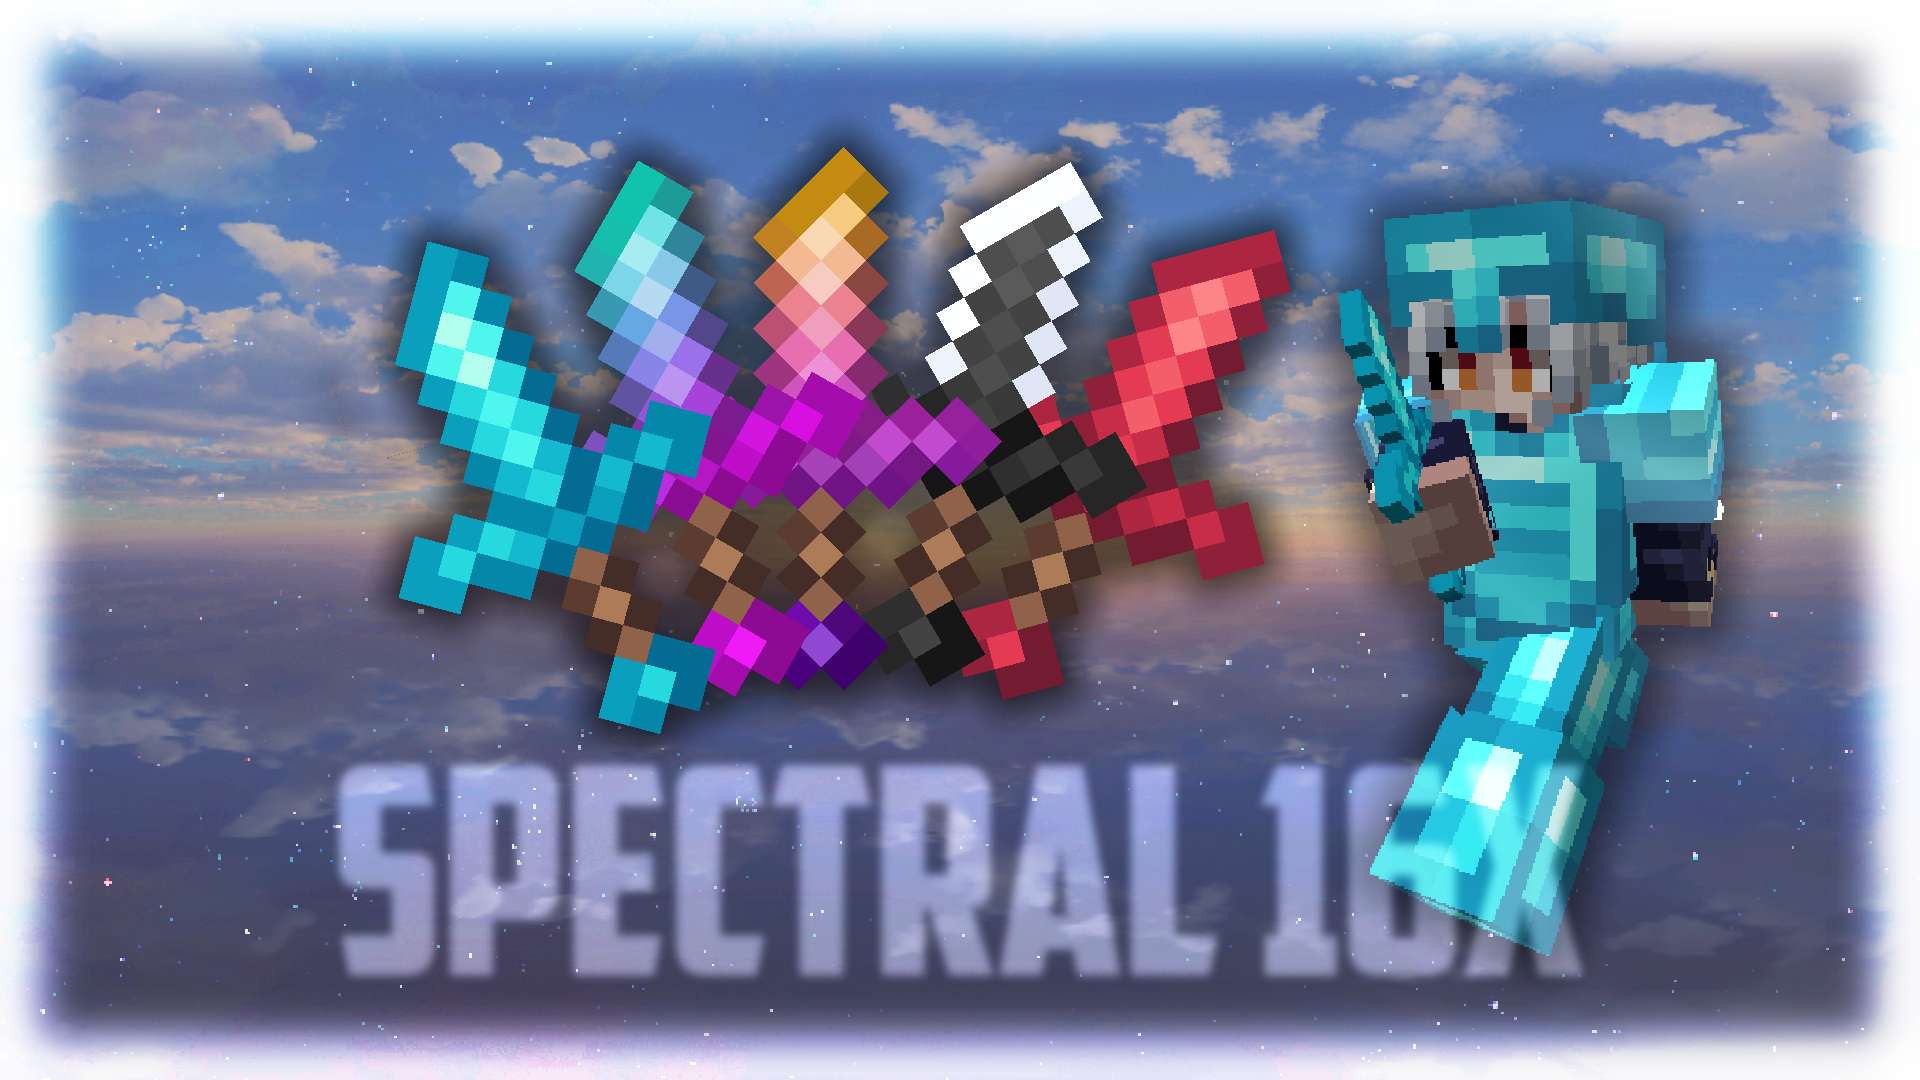 Spectral - Default 16x by Zlax on PvPRP